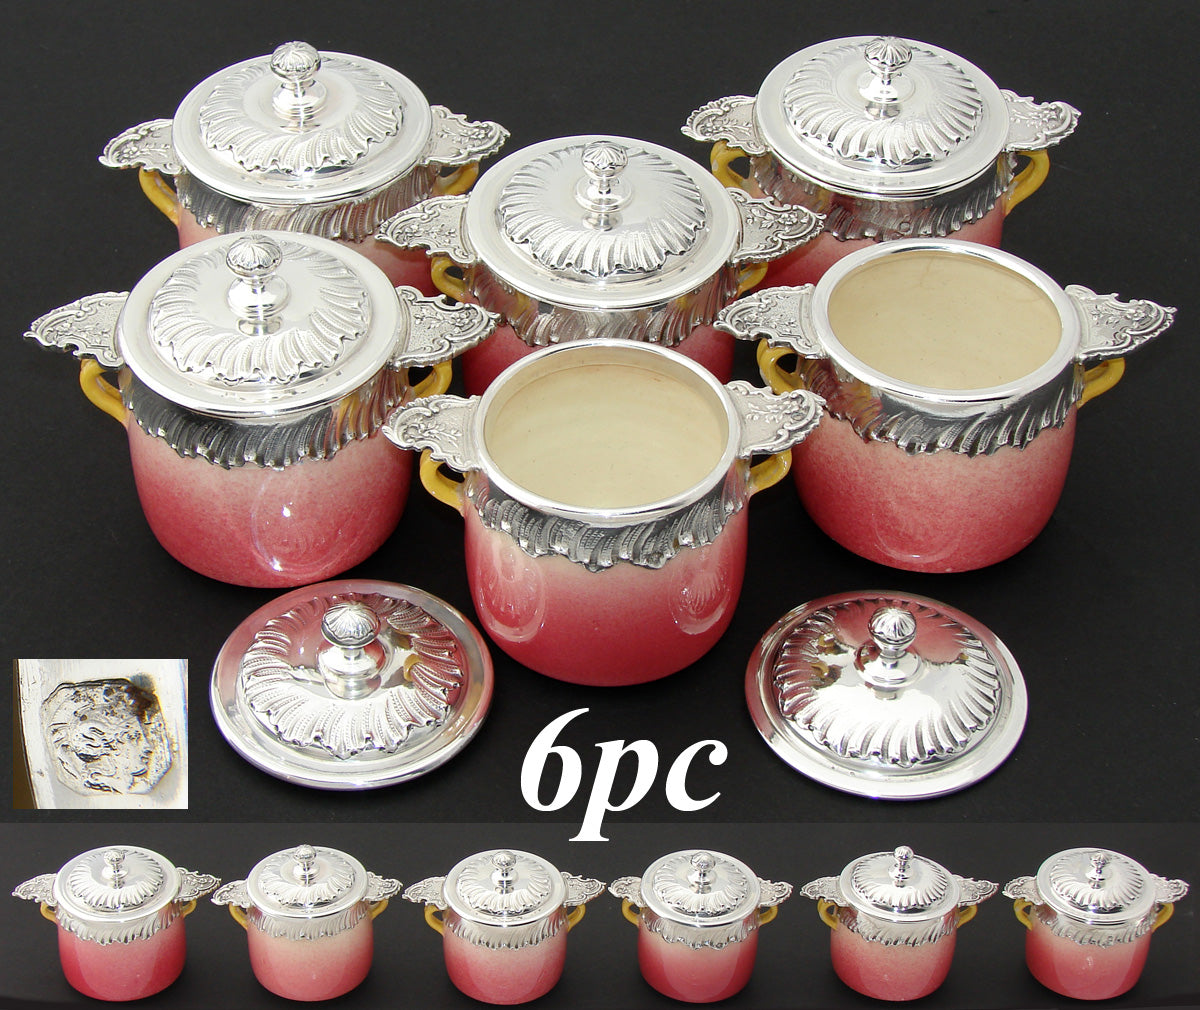 Fab Antique French Stelring Silver & Pink Pottery 6pc Pot de Creme Set, Cream Pots, Rococo Style